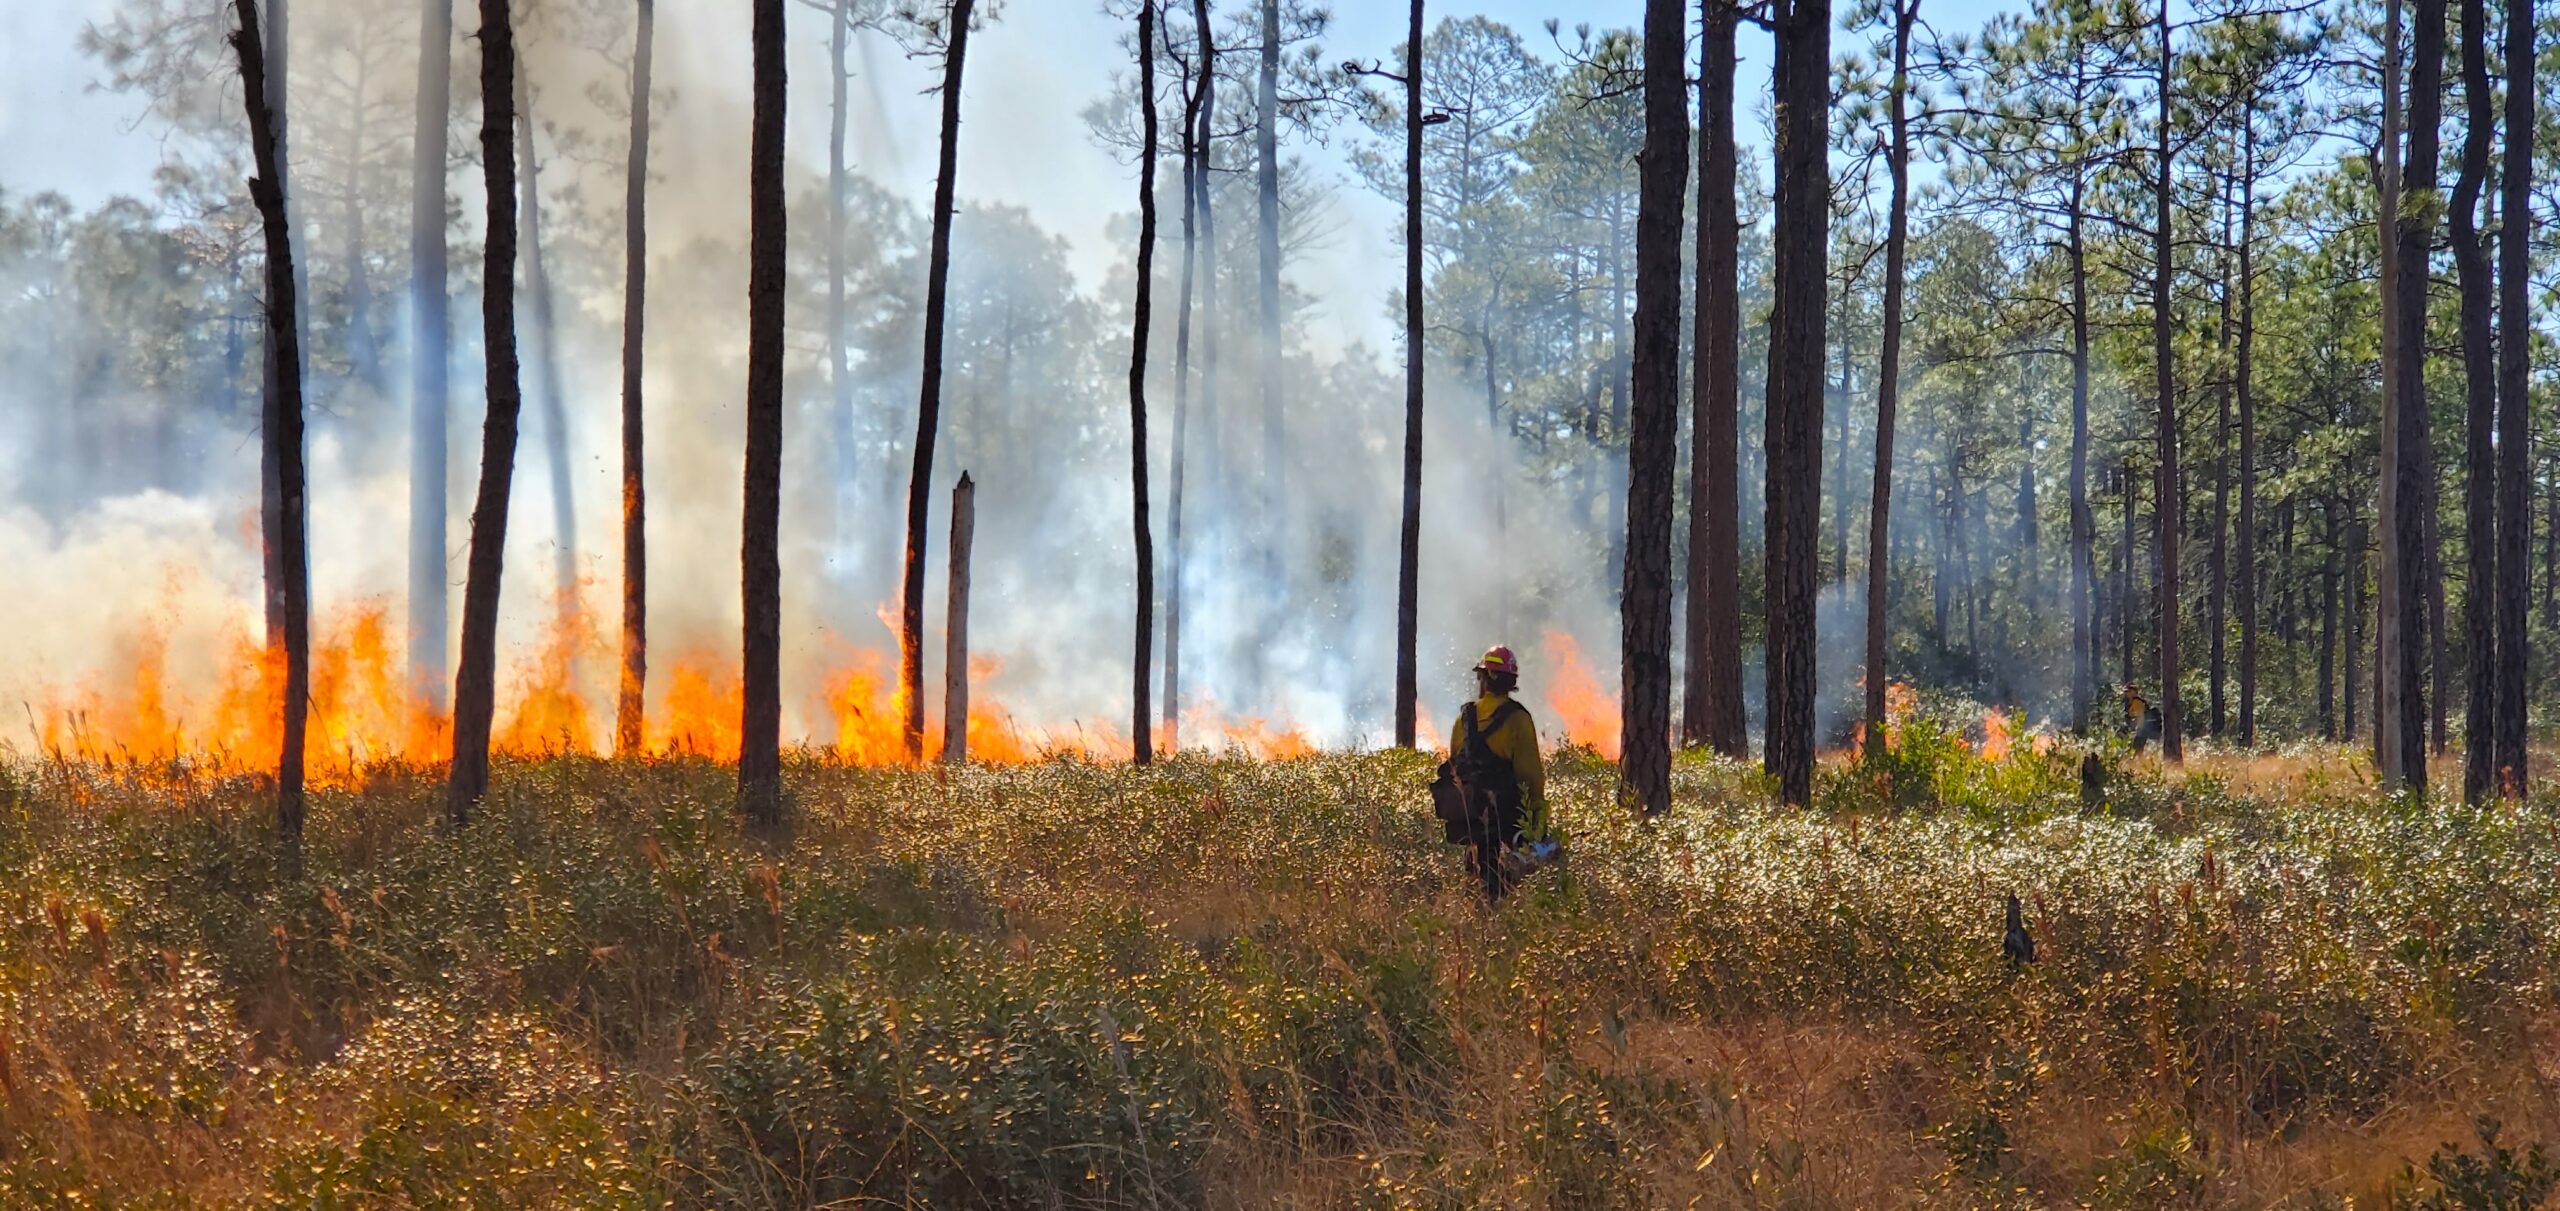 A firefighter watches the flames of a prescribed burn.